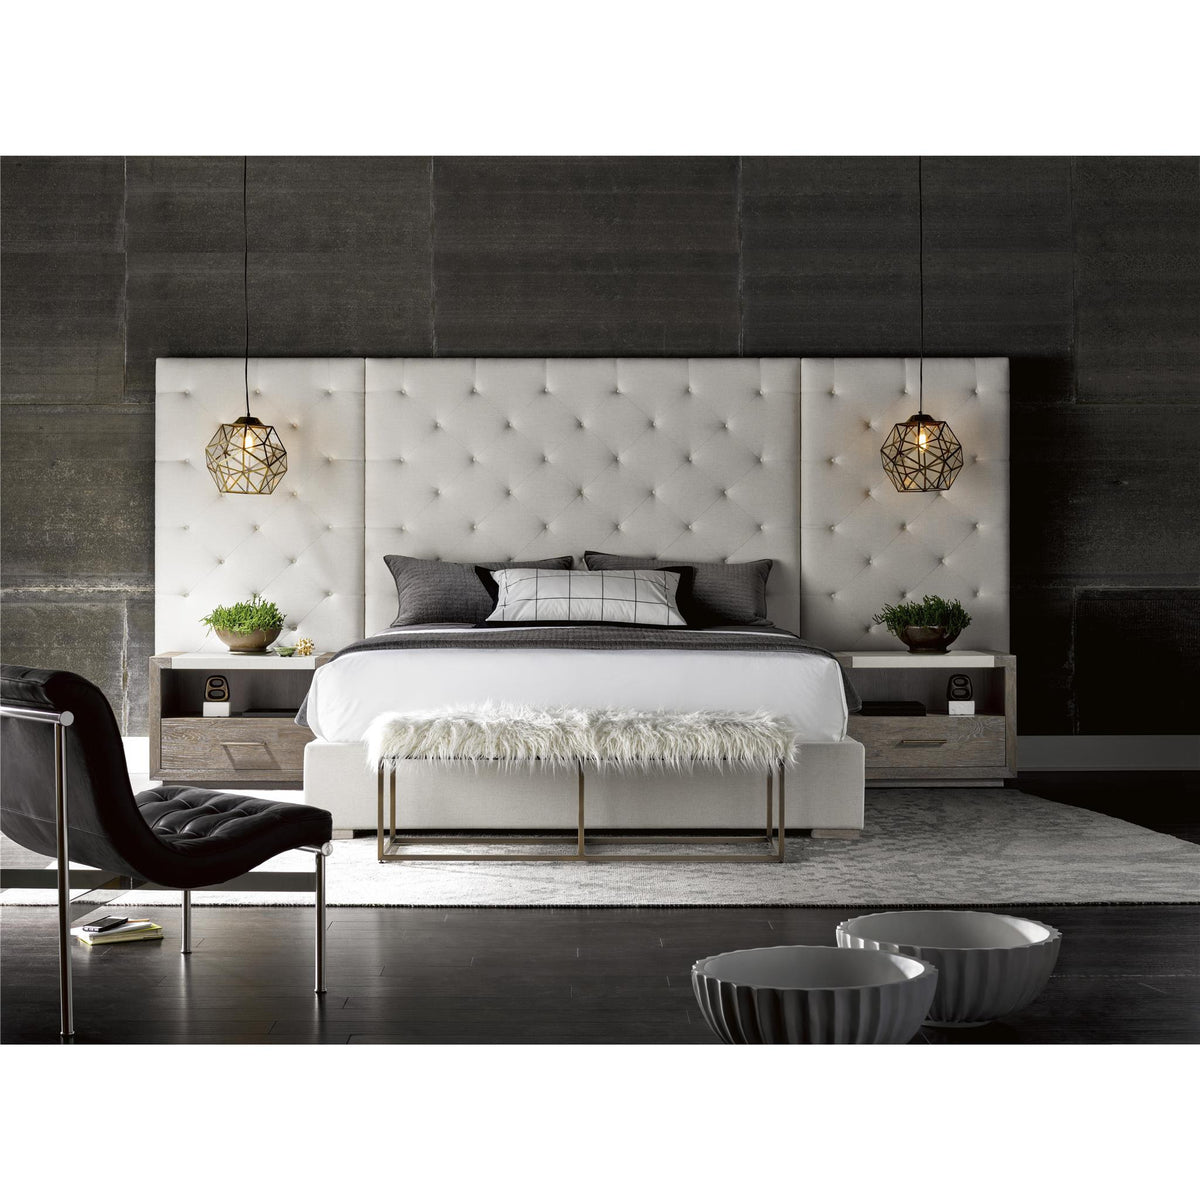 Brando Bed With Panels - Be Bold Furniture